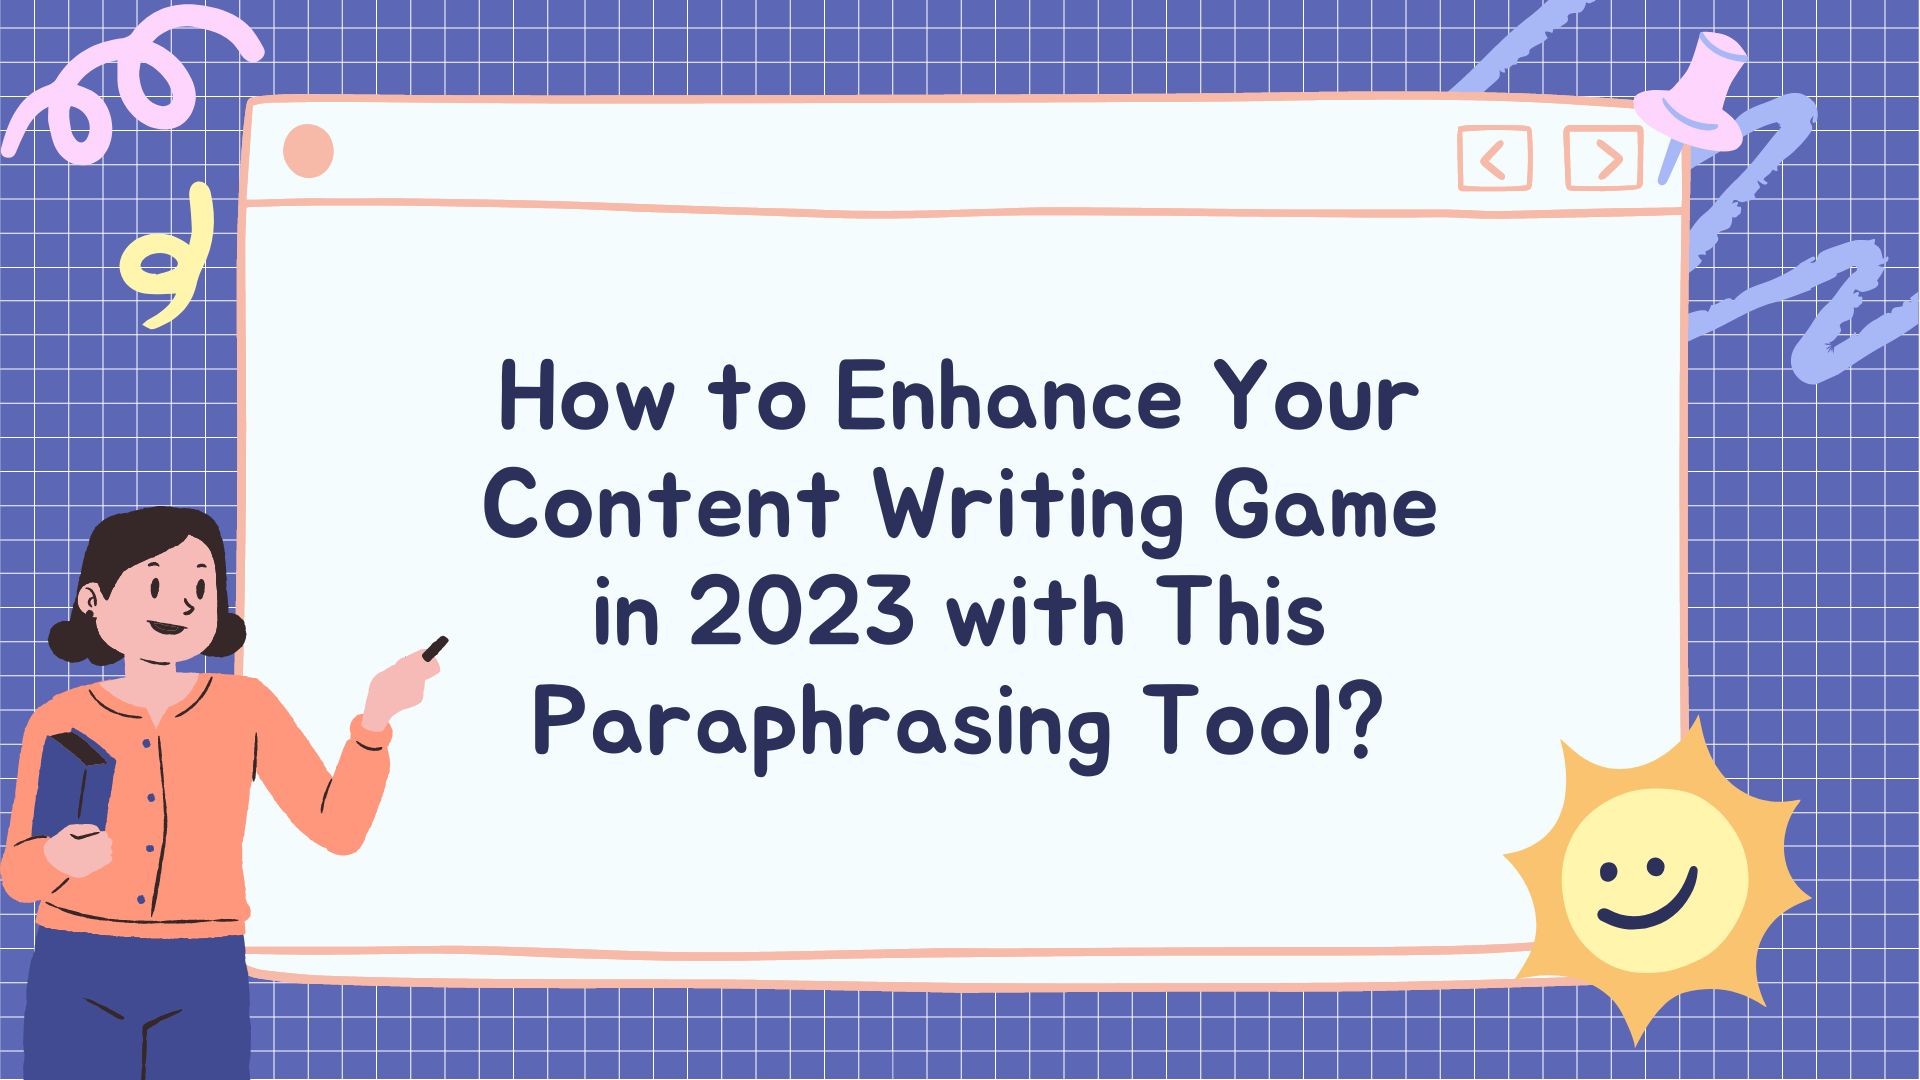 How to Enhance Your Content Writing Game in 2023 with This Paraphrasing Tool